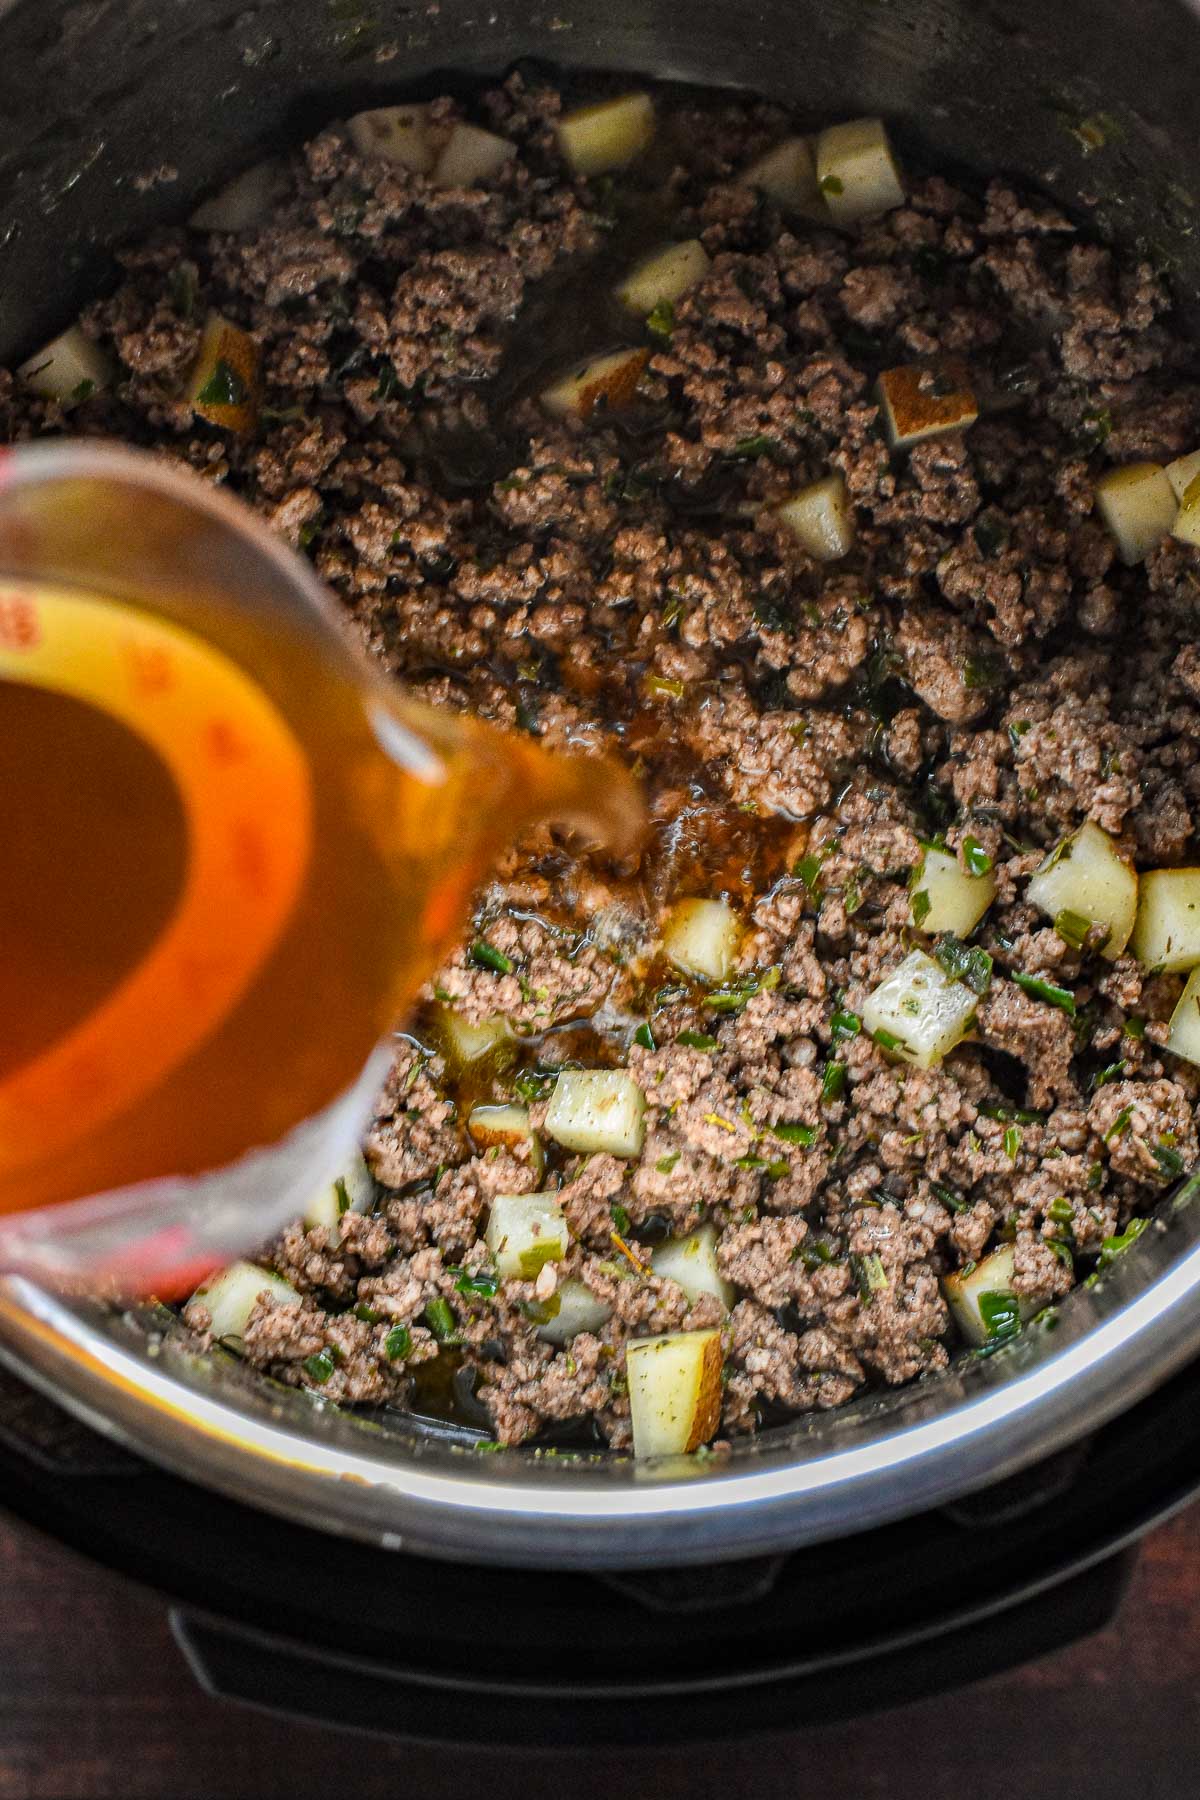 pouring low fodmap beef broth into an instant pot to deglaze the pot containing low fodmap tourtiere filling.